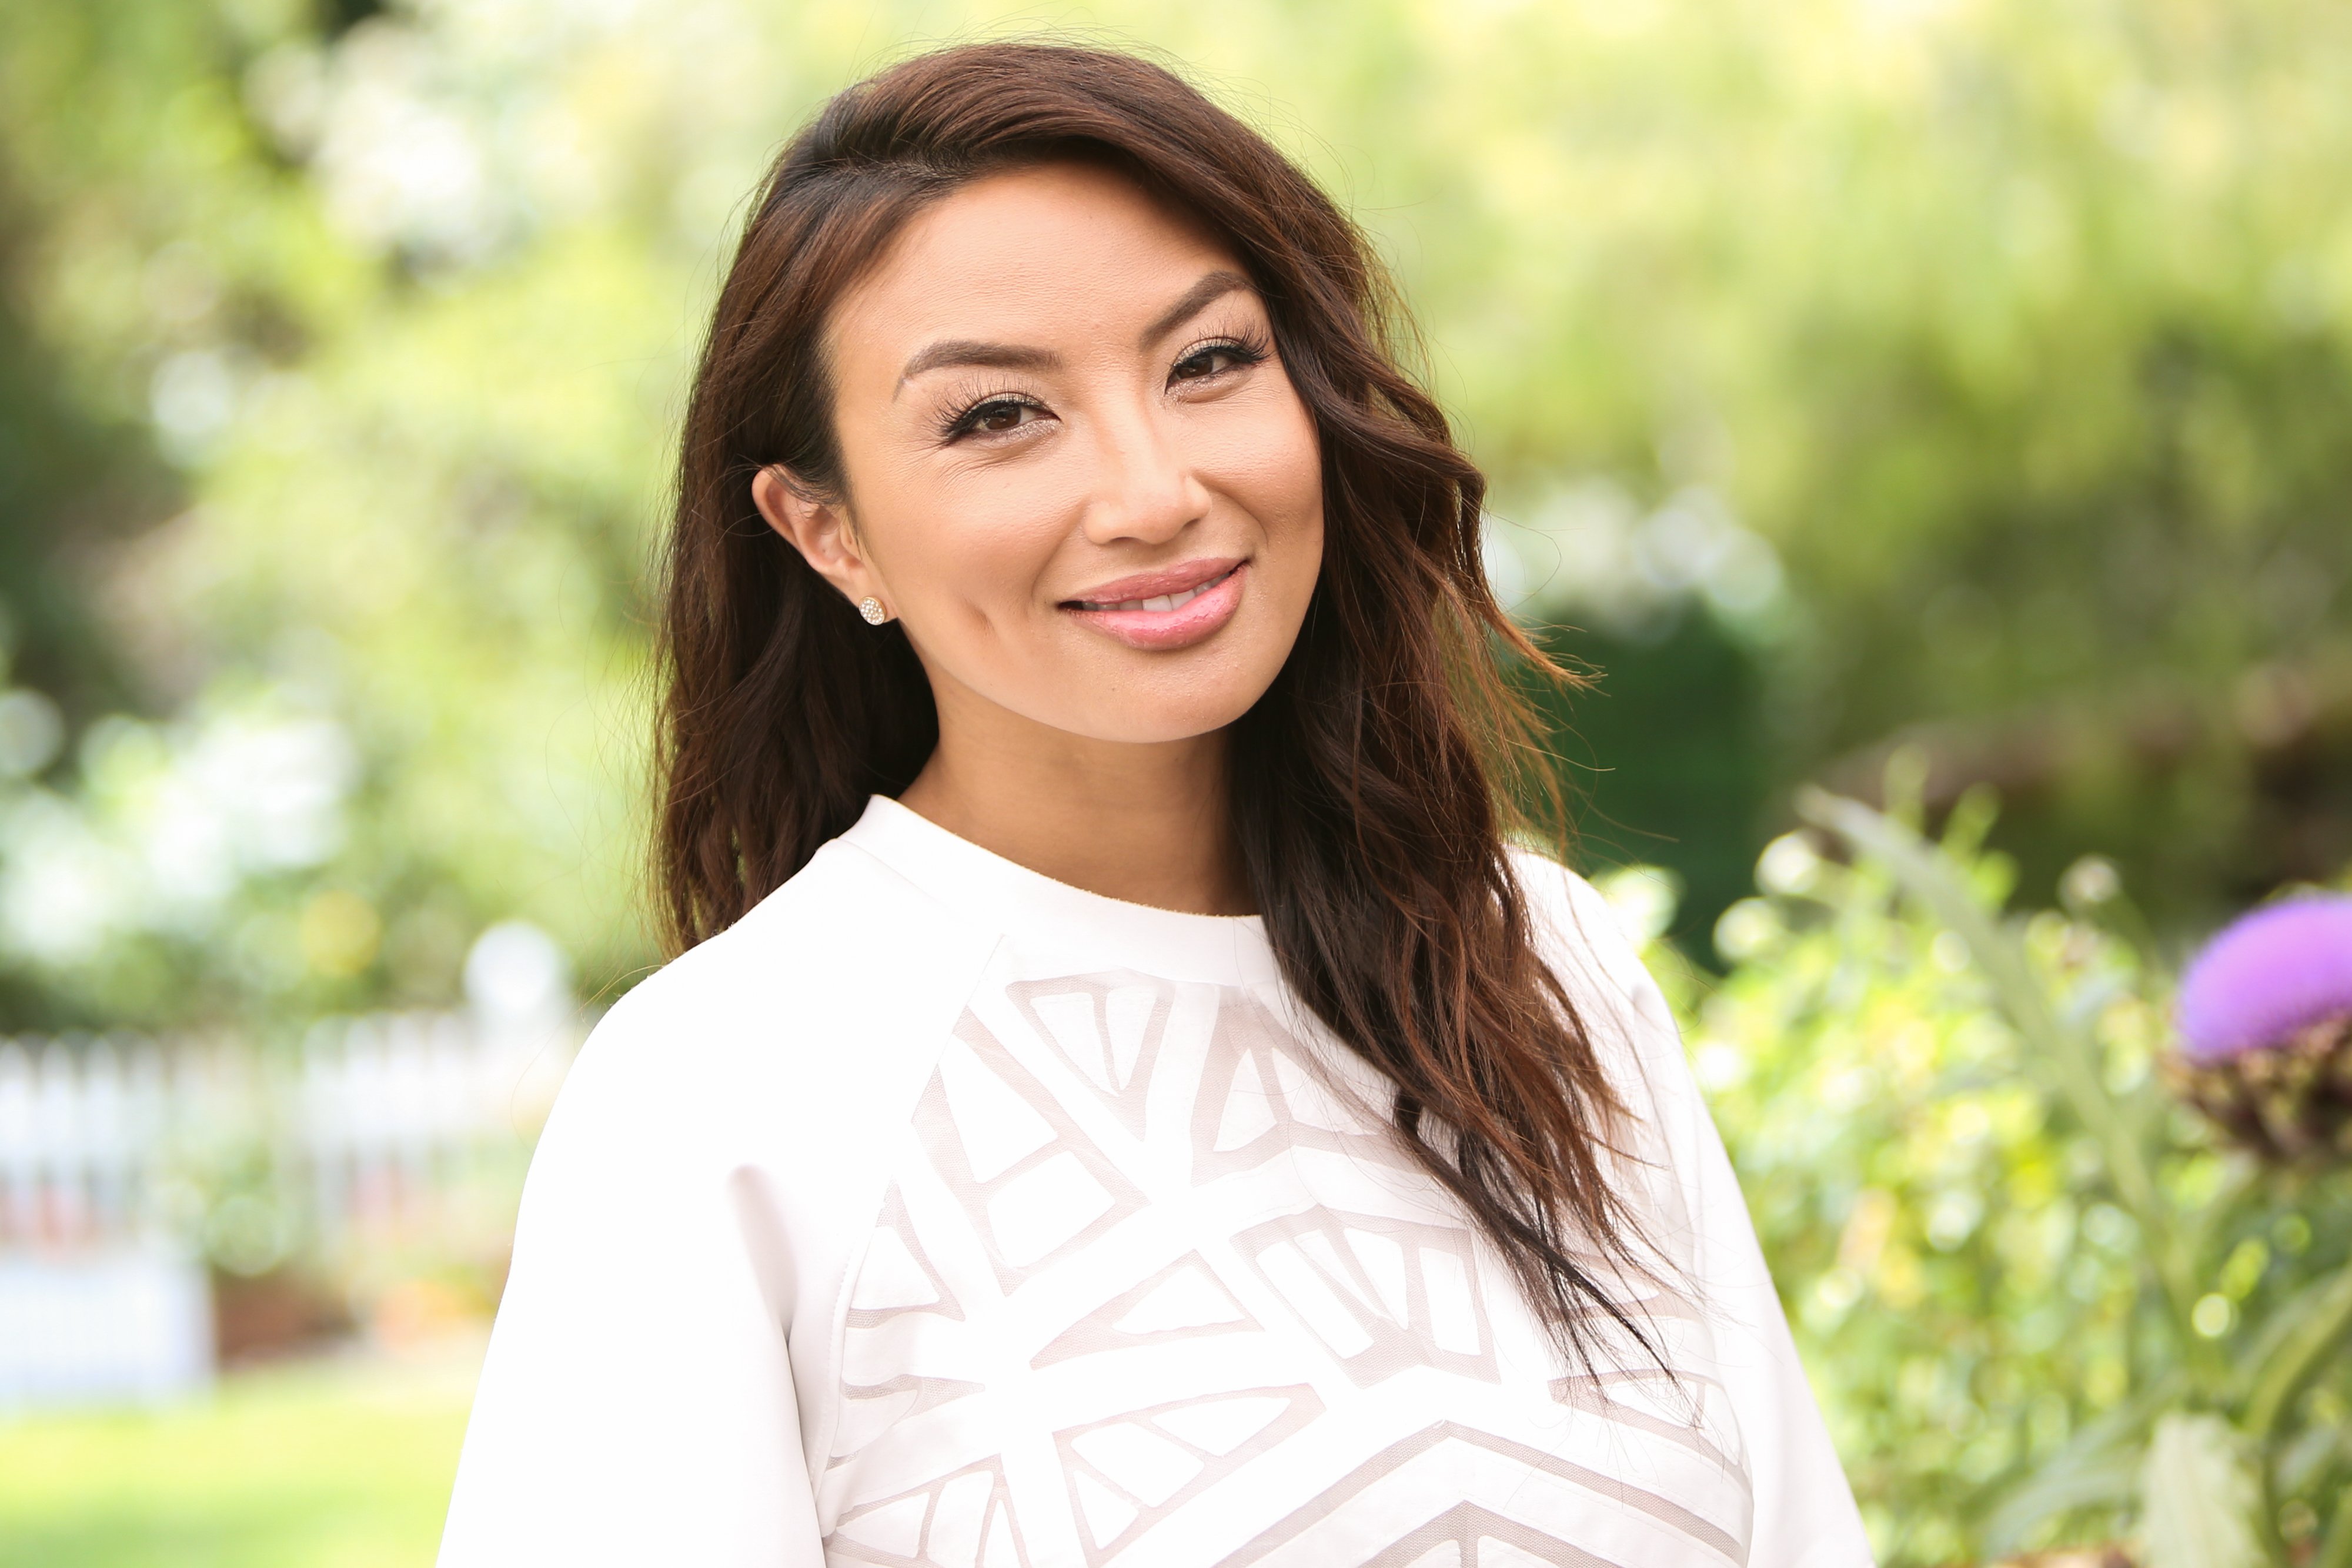 Jeannie Mai at Hallmark's "Home & Family" at Universal Studios Hollywood on June 11, 2019. | Photo by Paul Archuleta/Getty Images